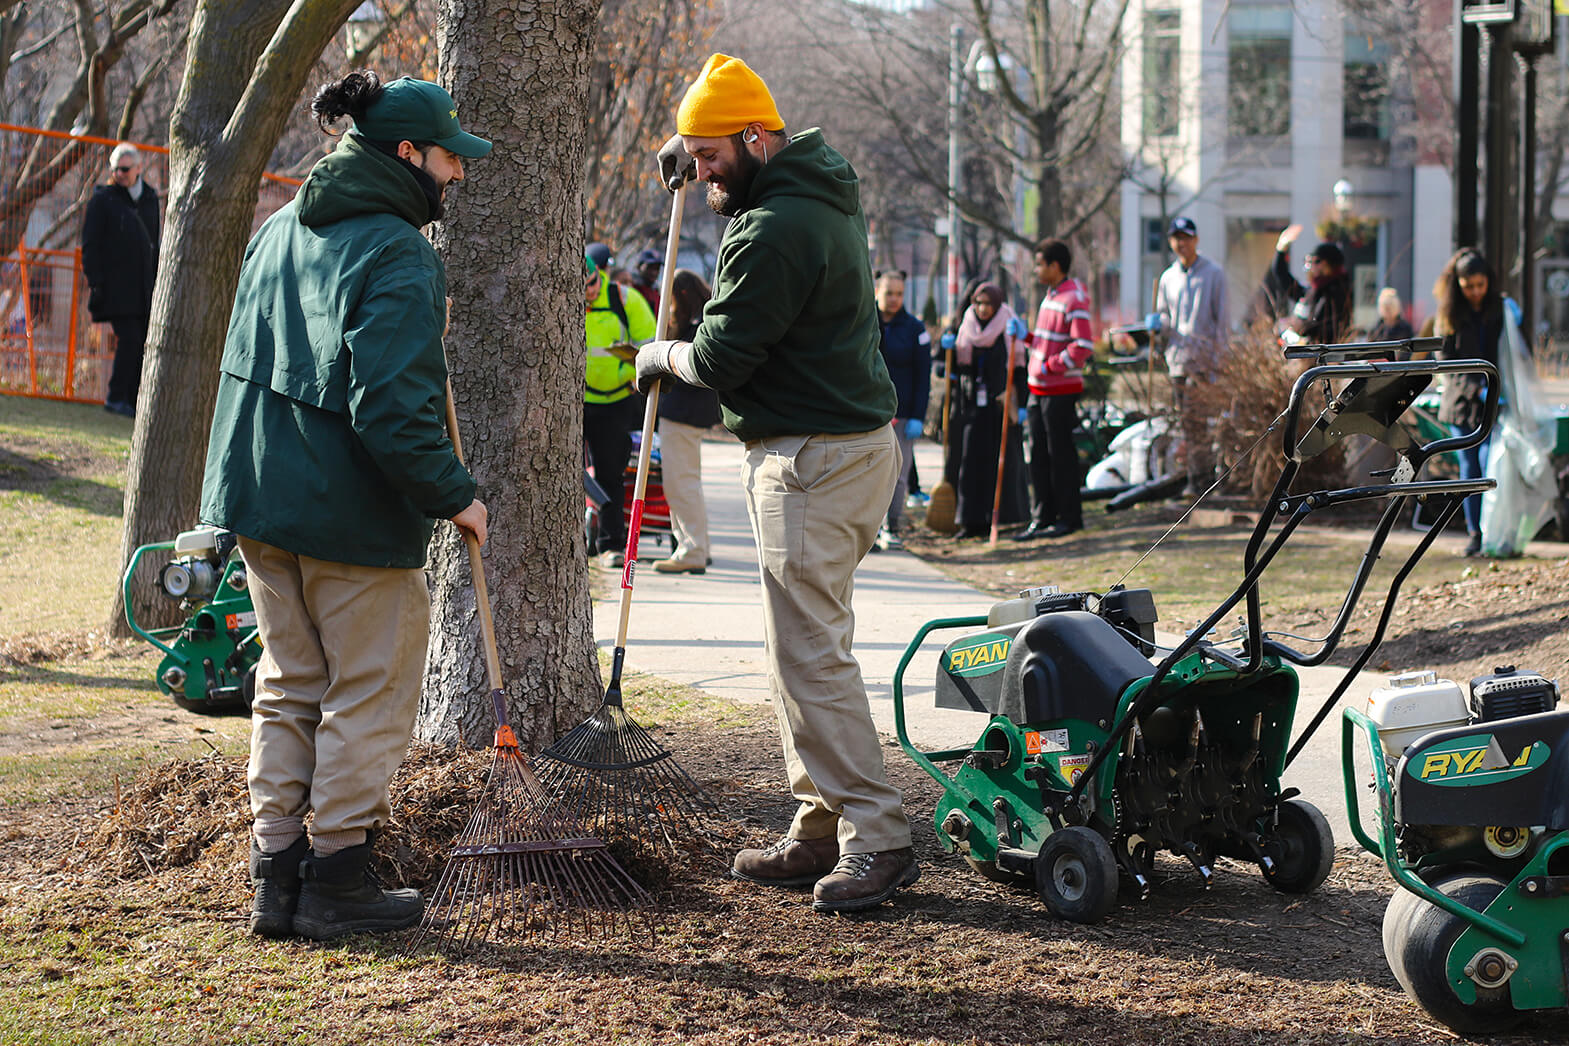 Equipment, labour, tools and supplies for the park clean up are provided at no cost to the city.